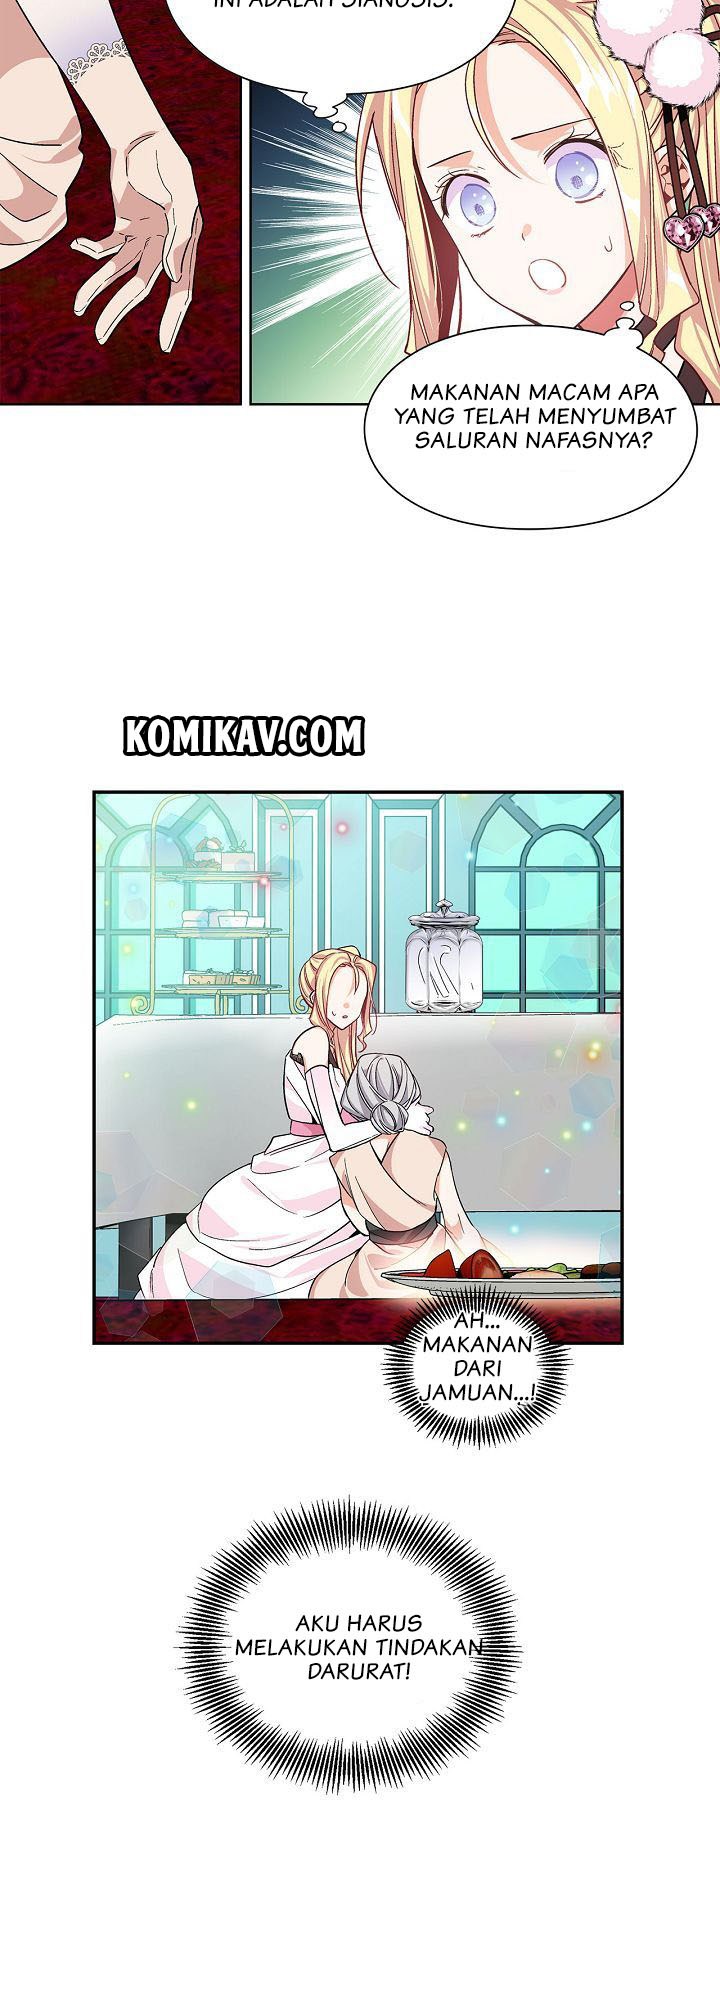 Doctor Elise: The Royal Lady With the Lamp Chapter 35